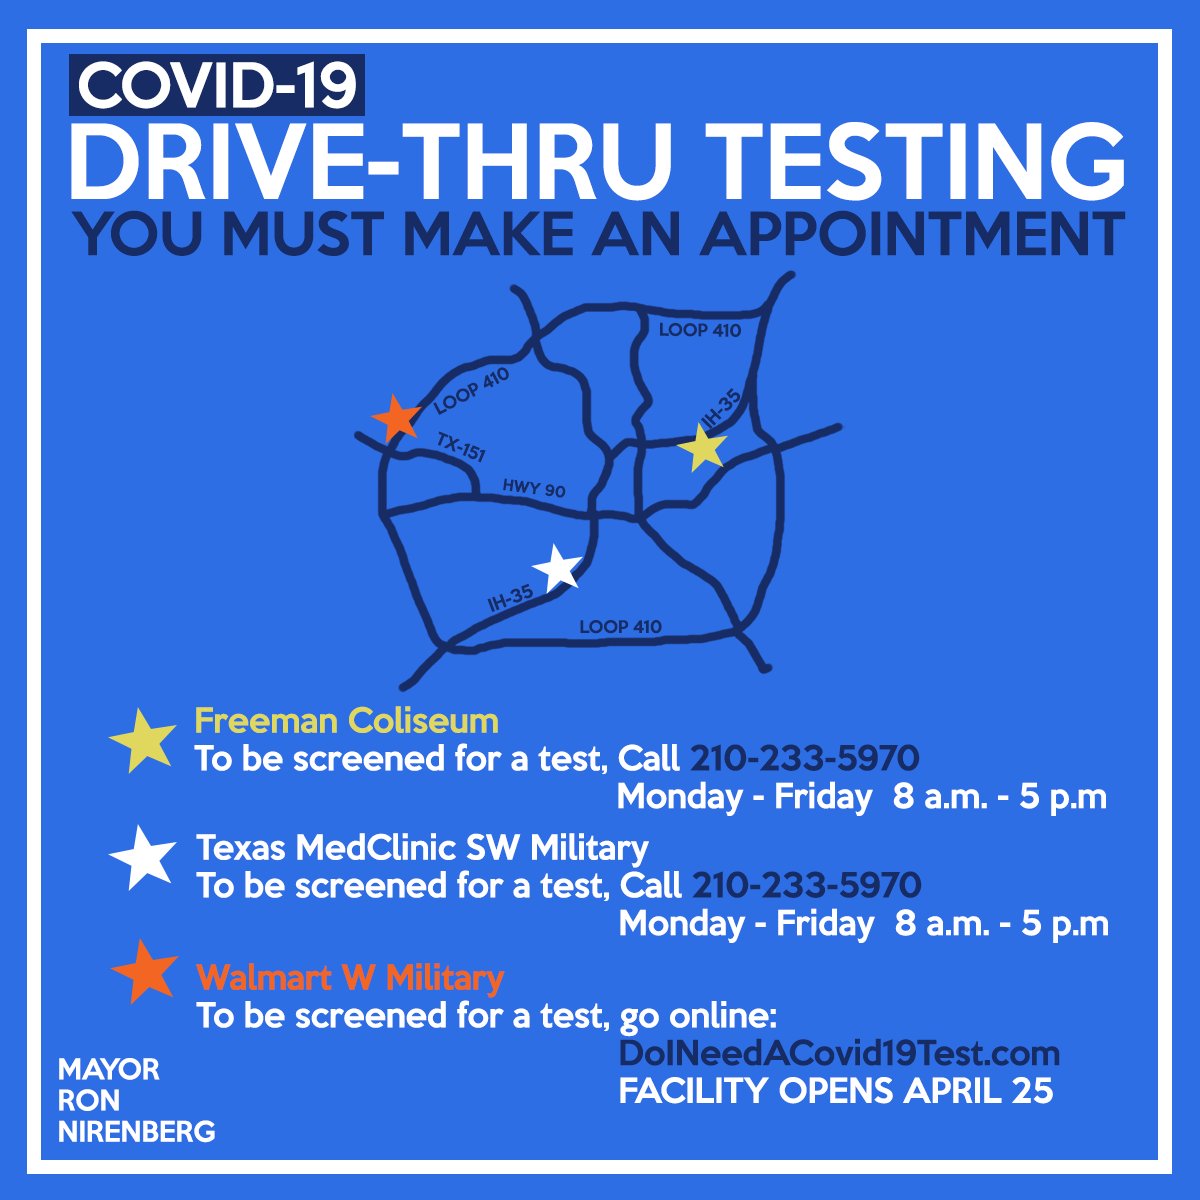 Two new drive-thru COVID-19 testing locations are open on the west and south sides of San Antonio. These are in addition to Freeman Coliseum.For more information:  https://sanantonio.gov/gpa/News/ArtMI 5/13